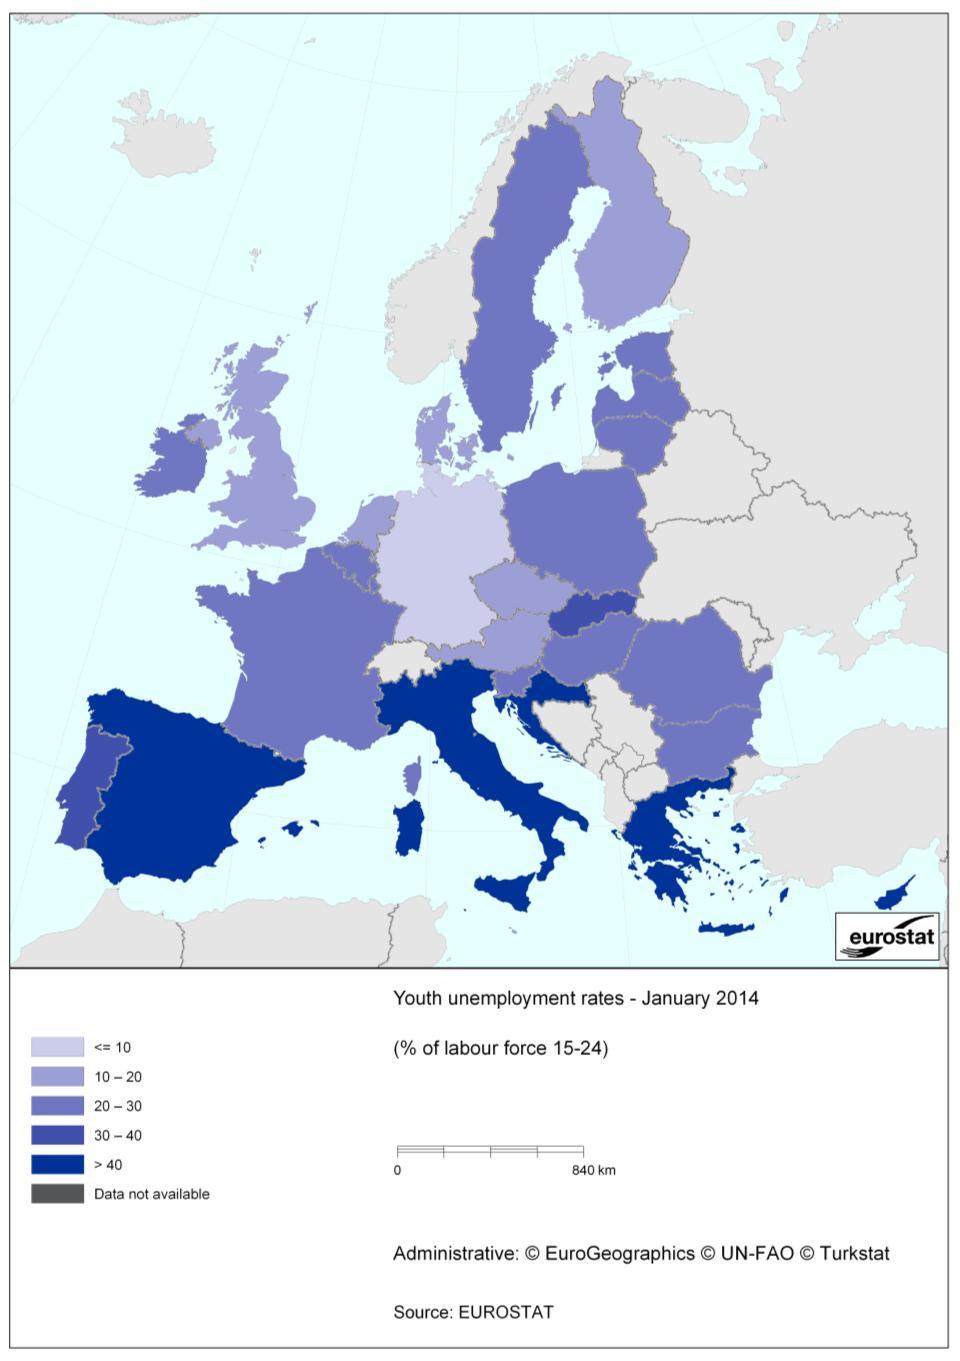 Youth unemployment rates in January 2014 Greece, Spain, Croatia: